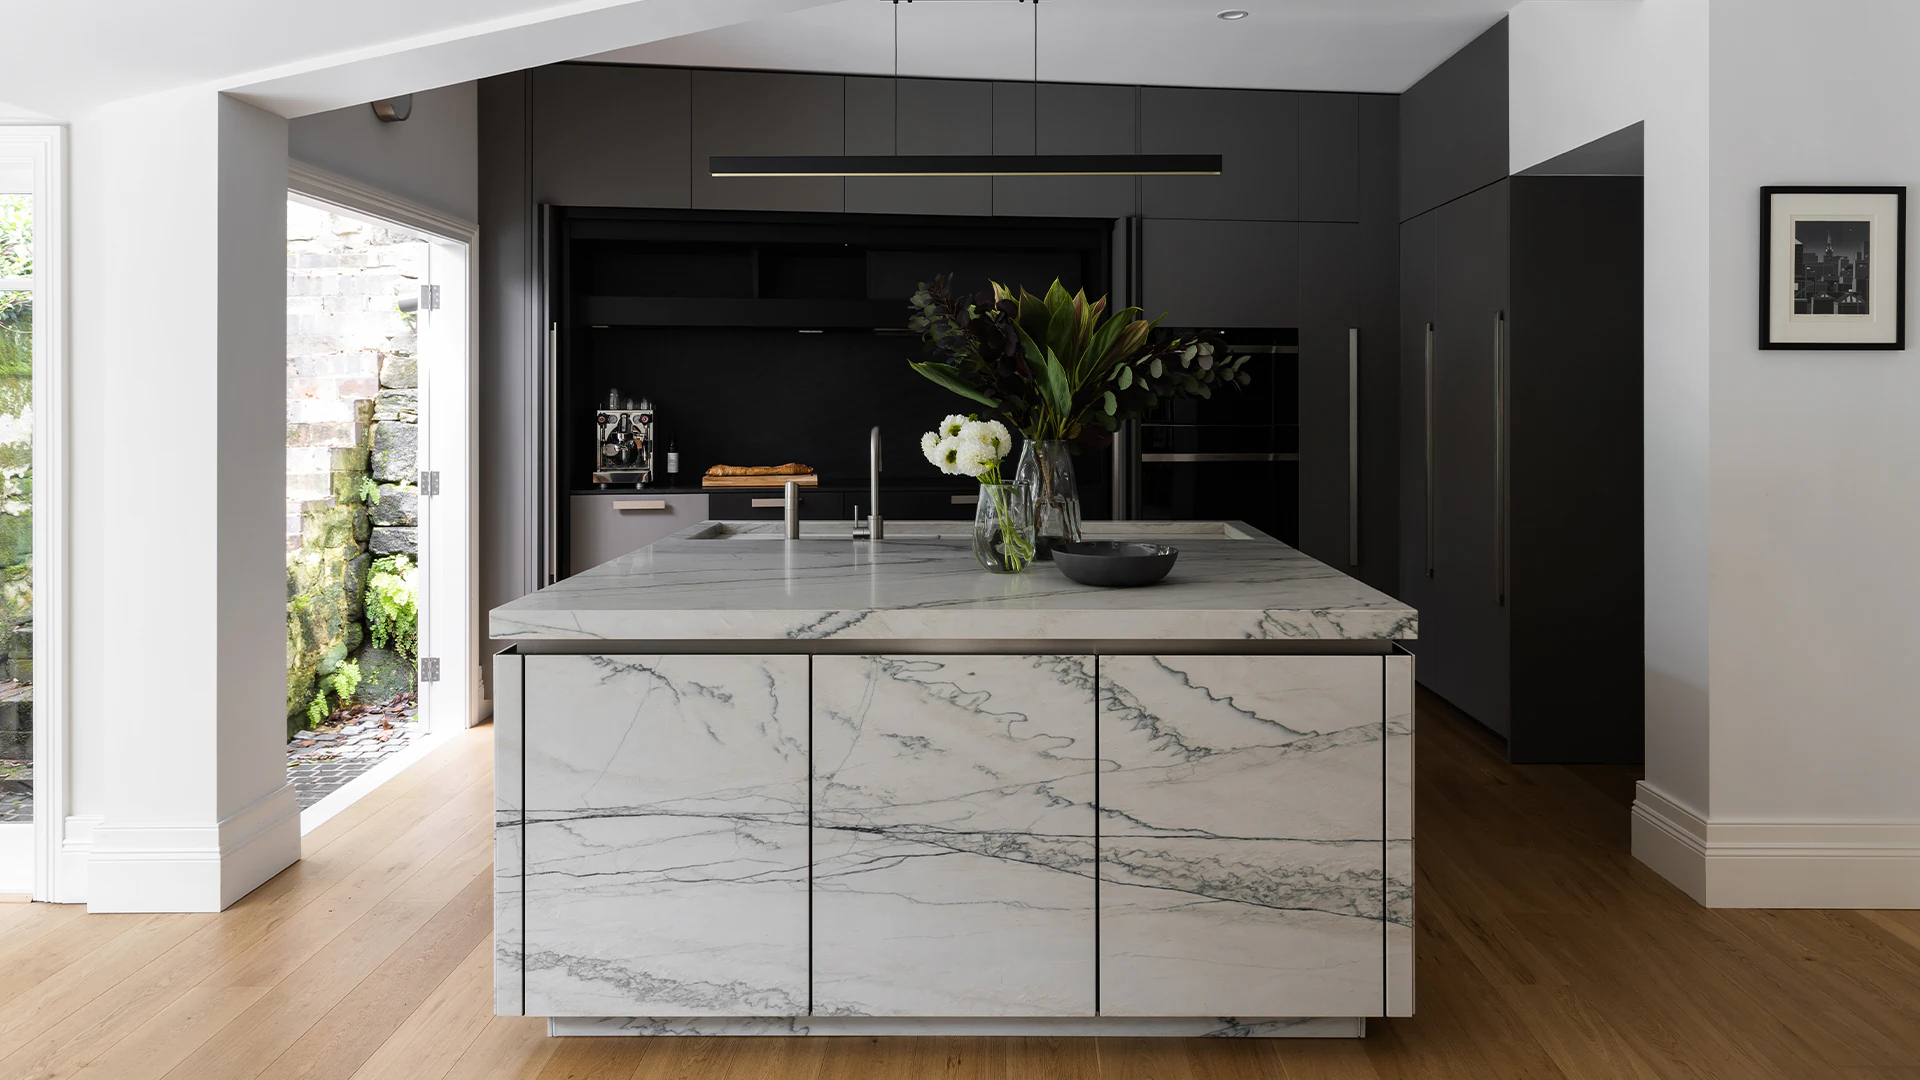 LUXURY INTERIORS PROJECY IN SYDNEY BY BOFFI KITCHEN2